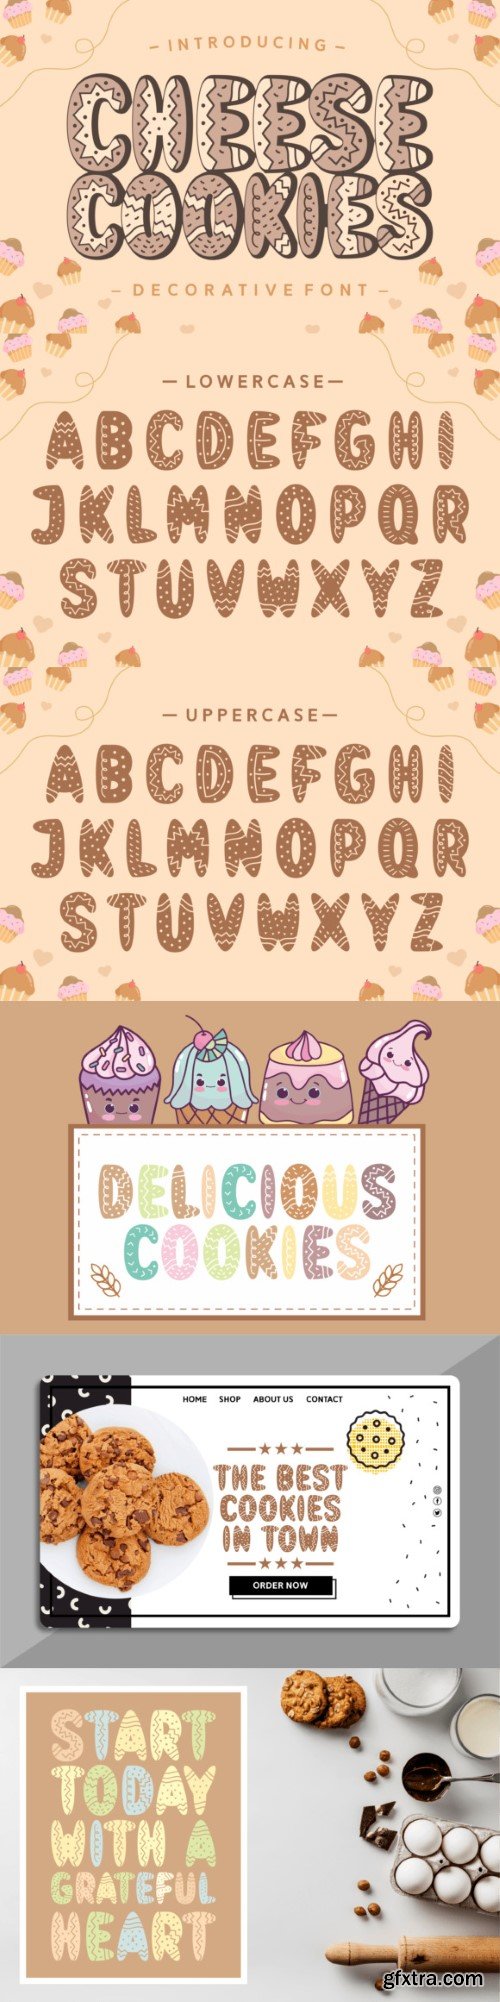 Cheese Cookies Font